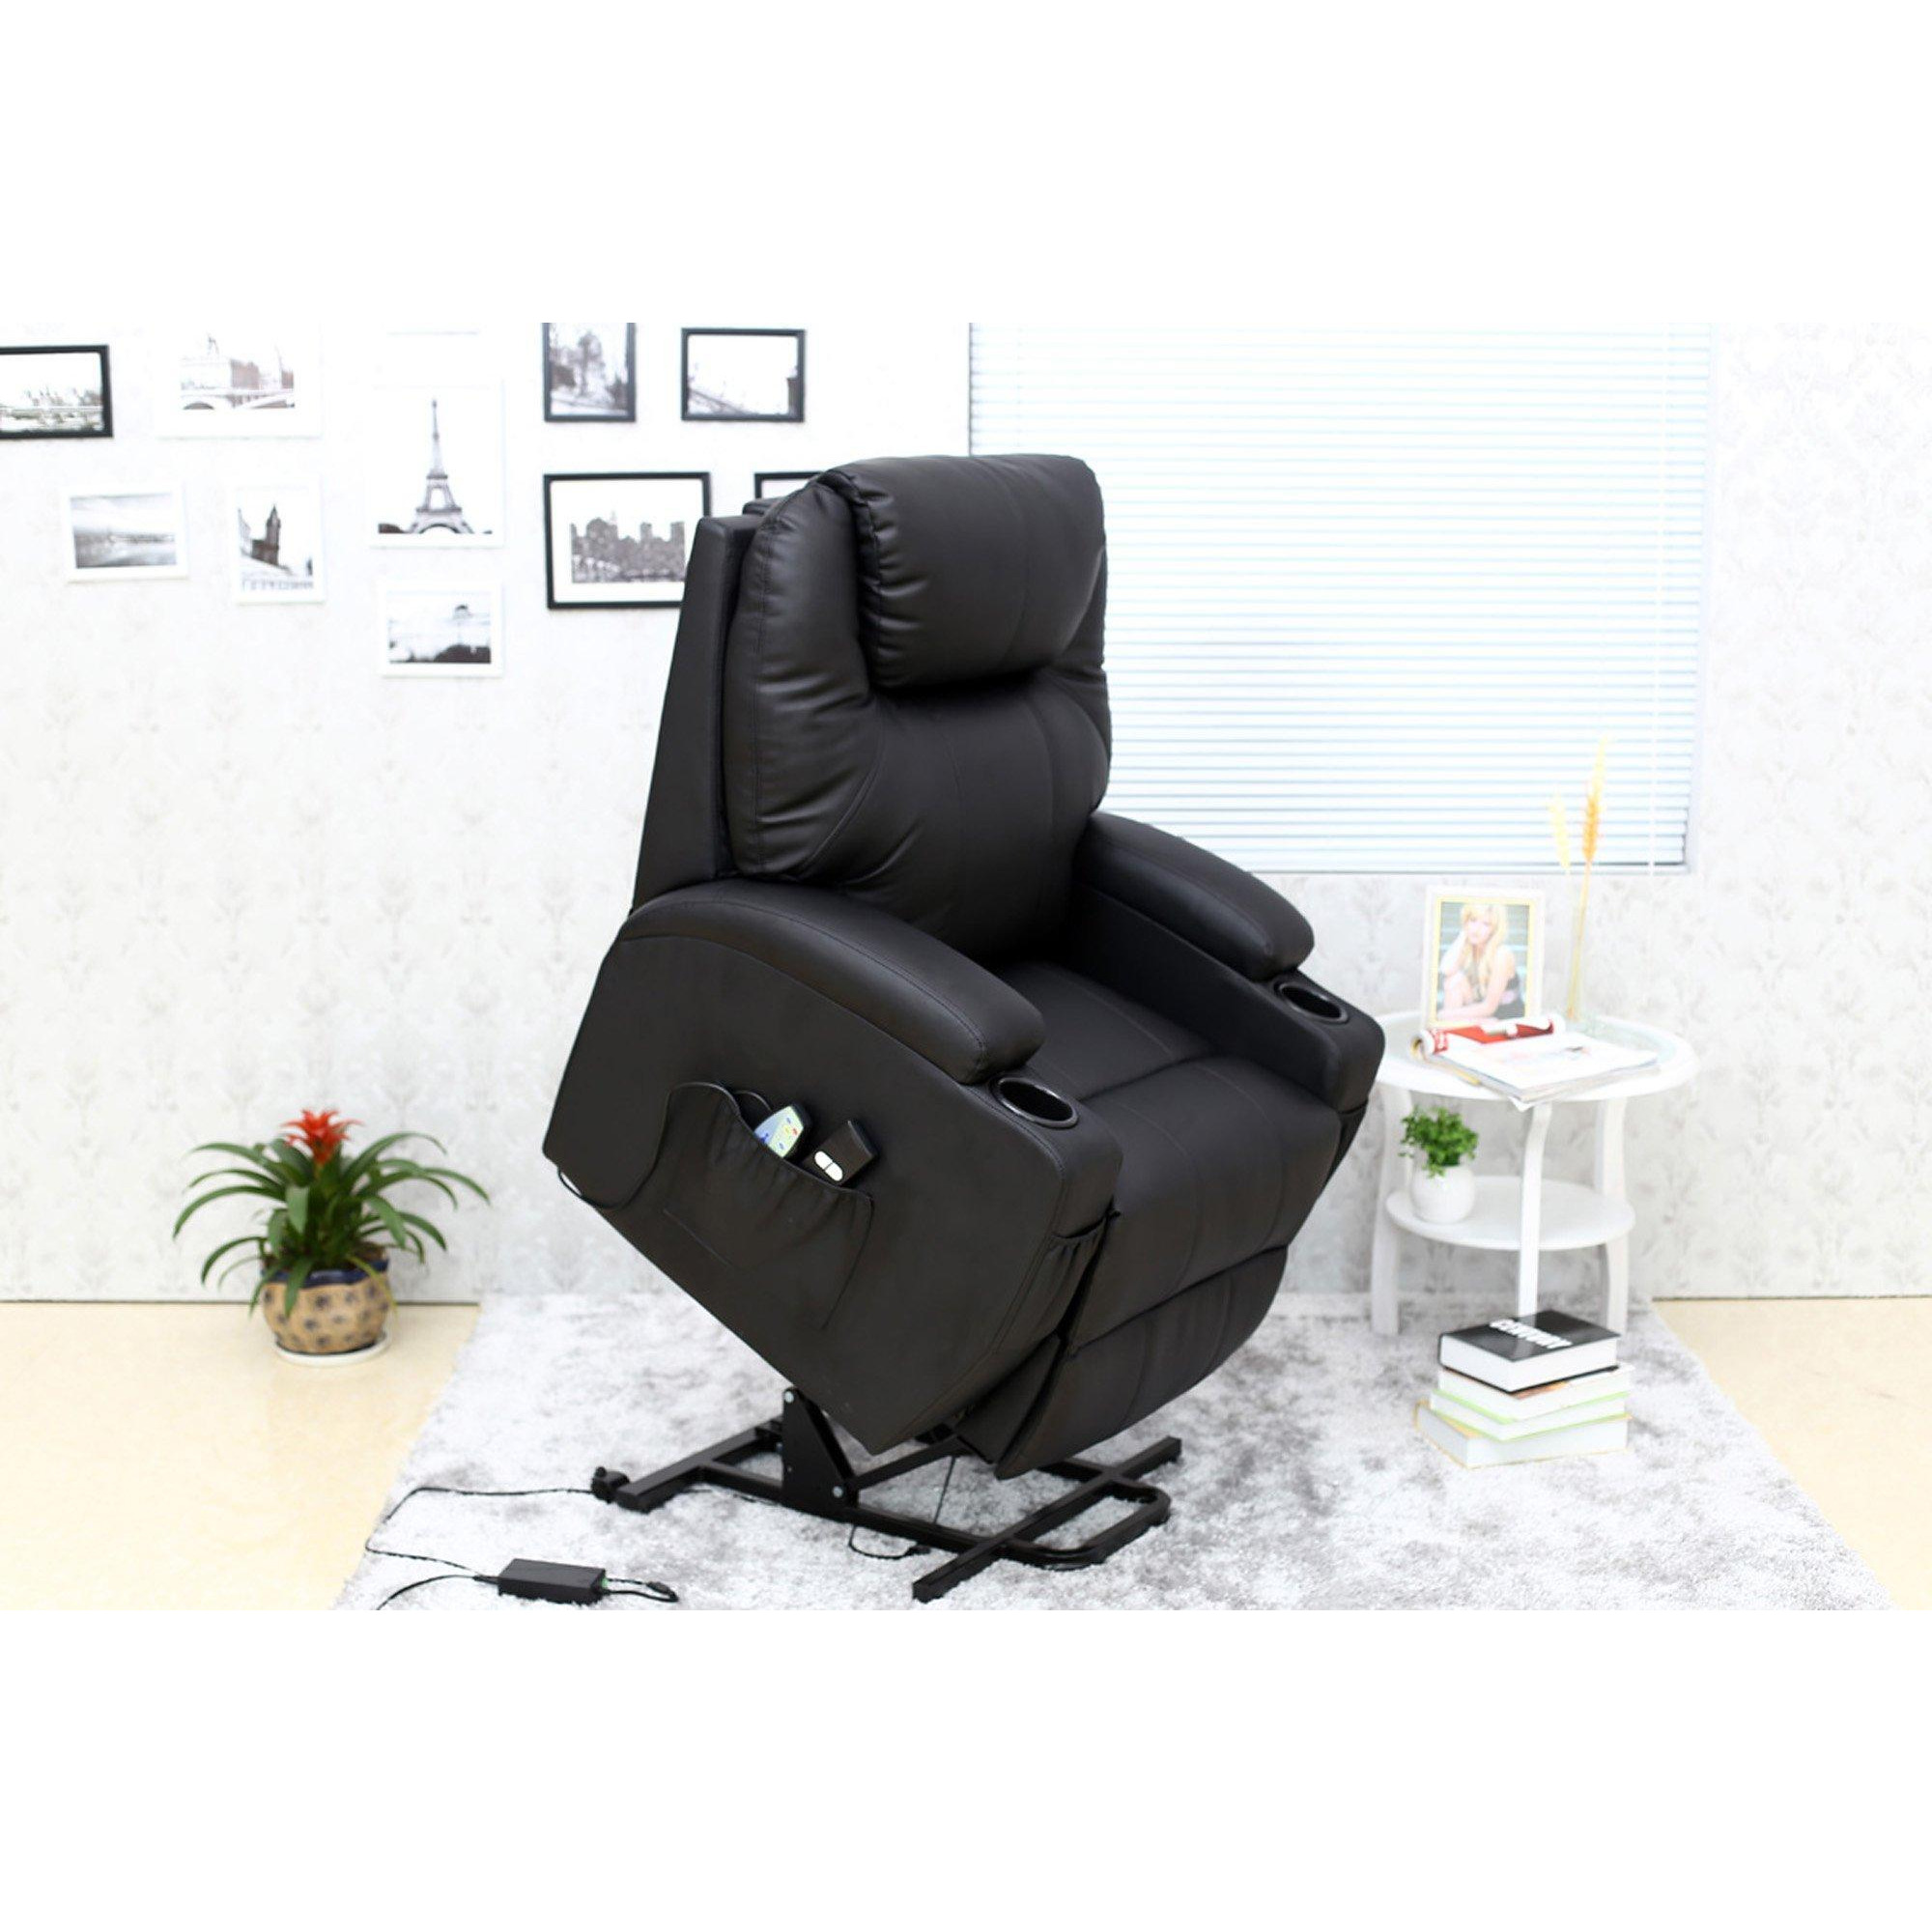 Cinemo Single Motor Rise Recliner Bonded Leather Heat & Massage Chair - image 1